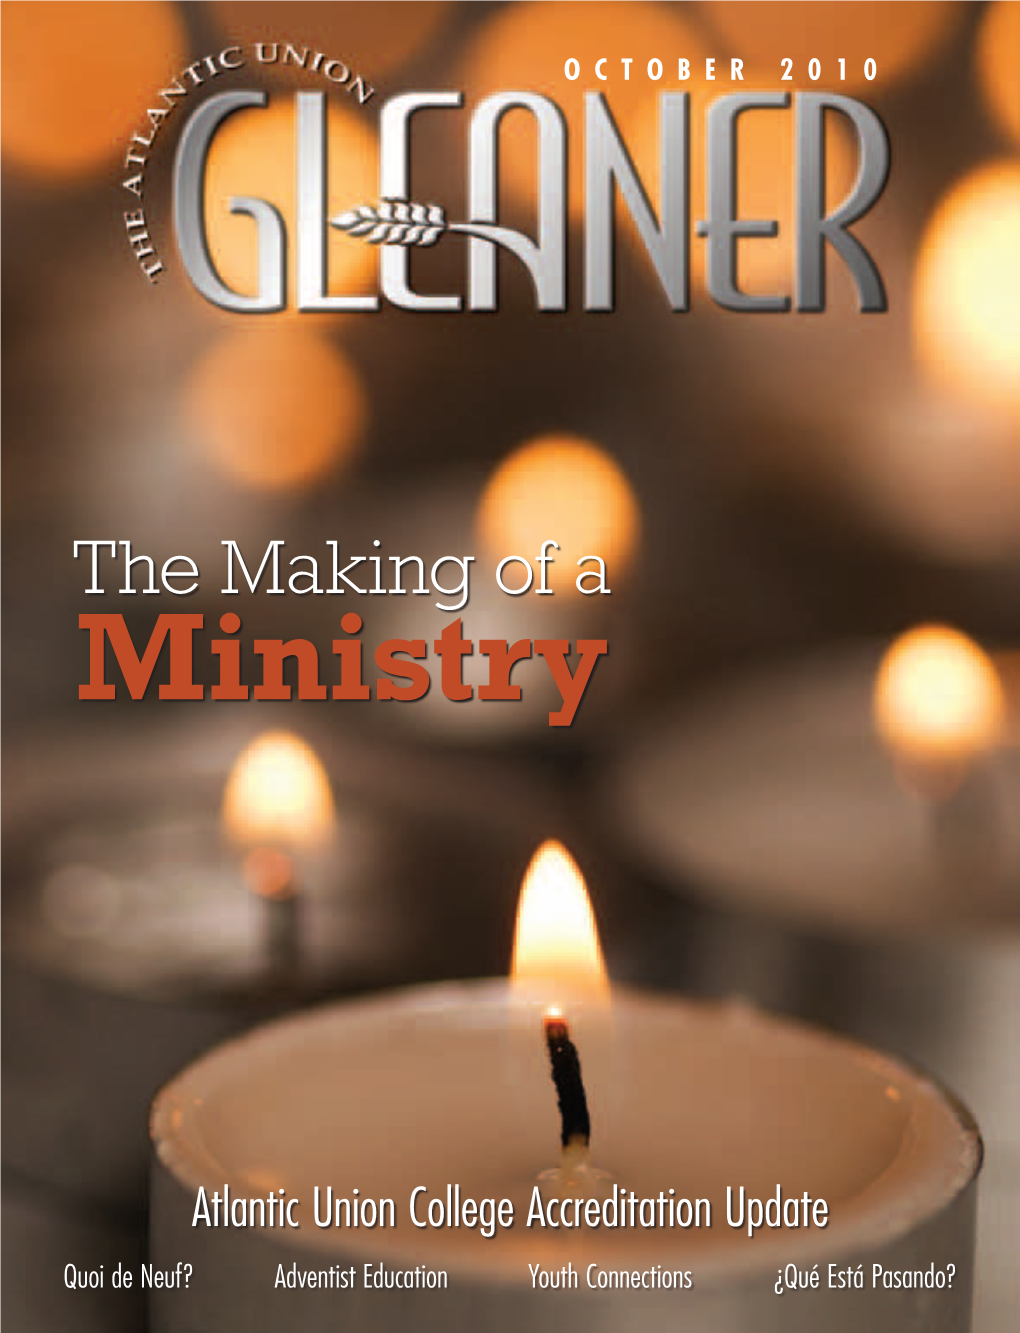 The Making of a Ministry